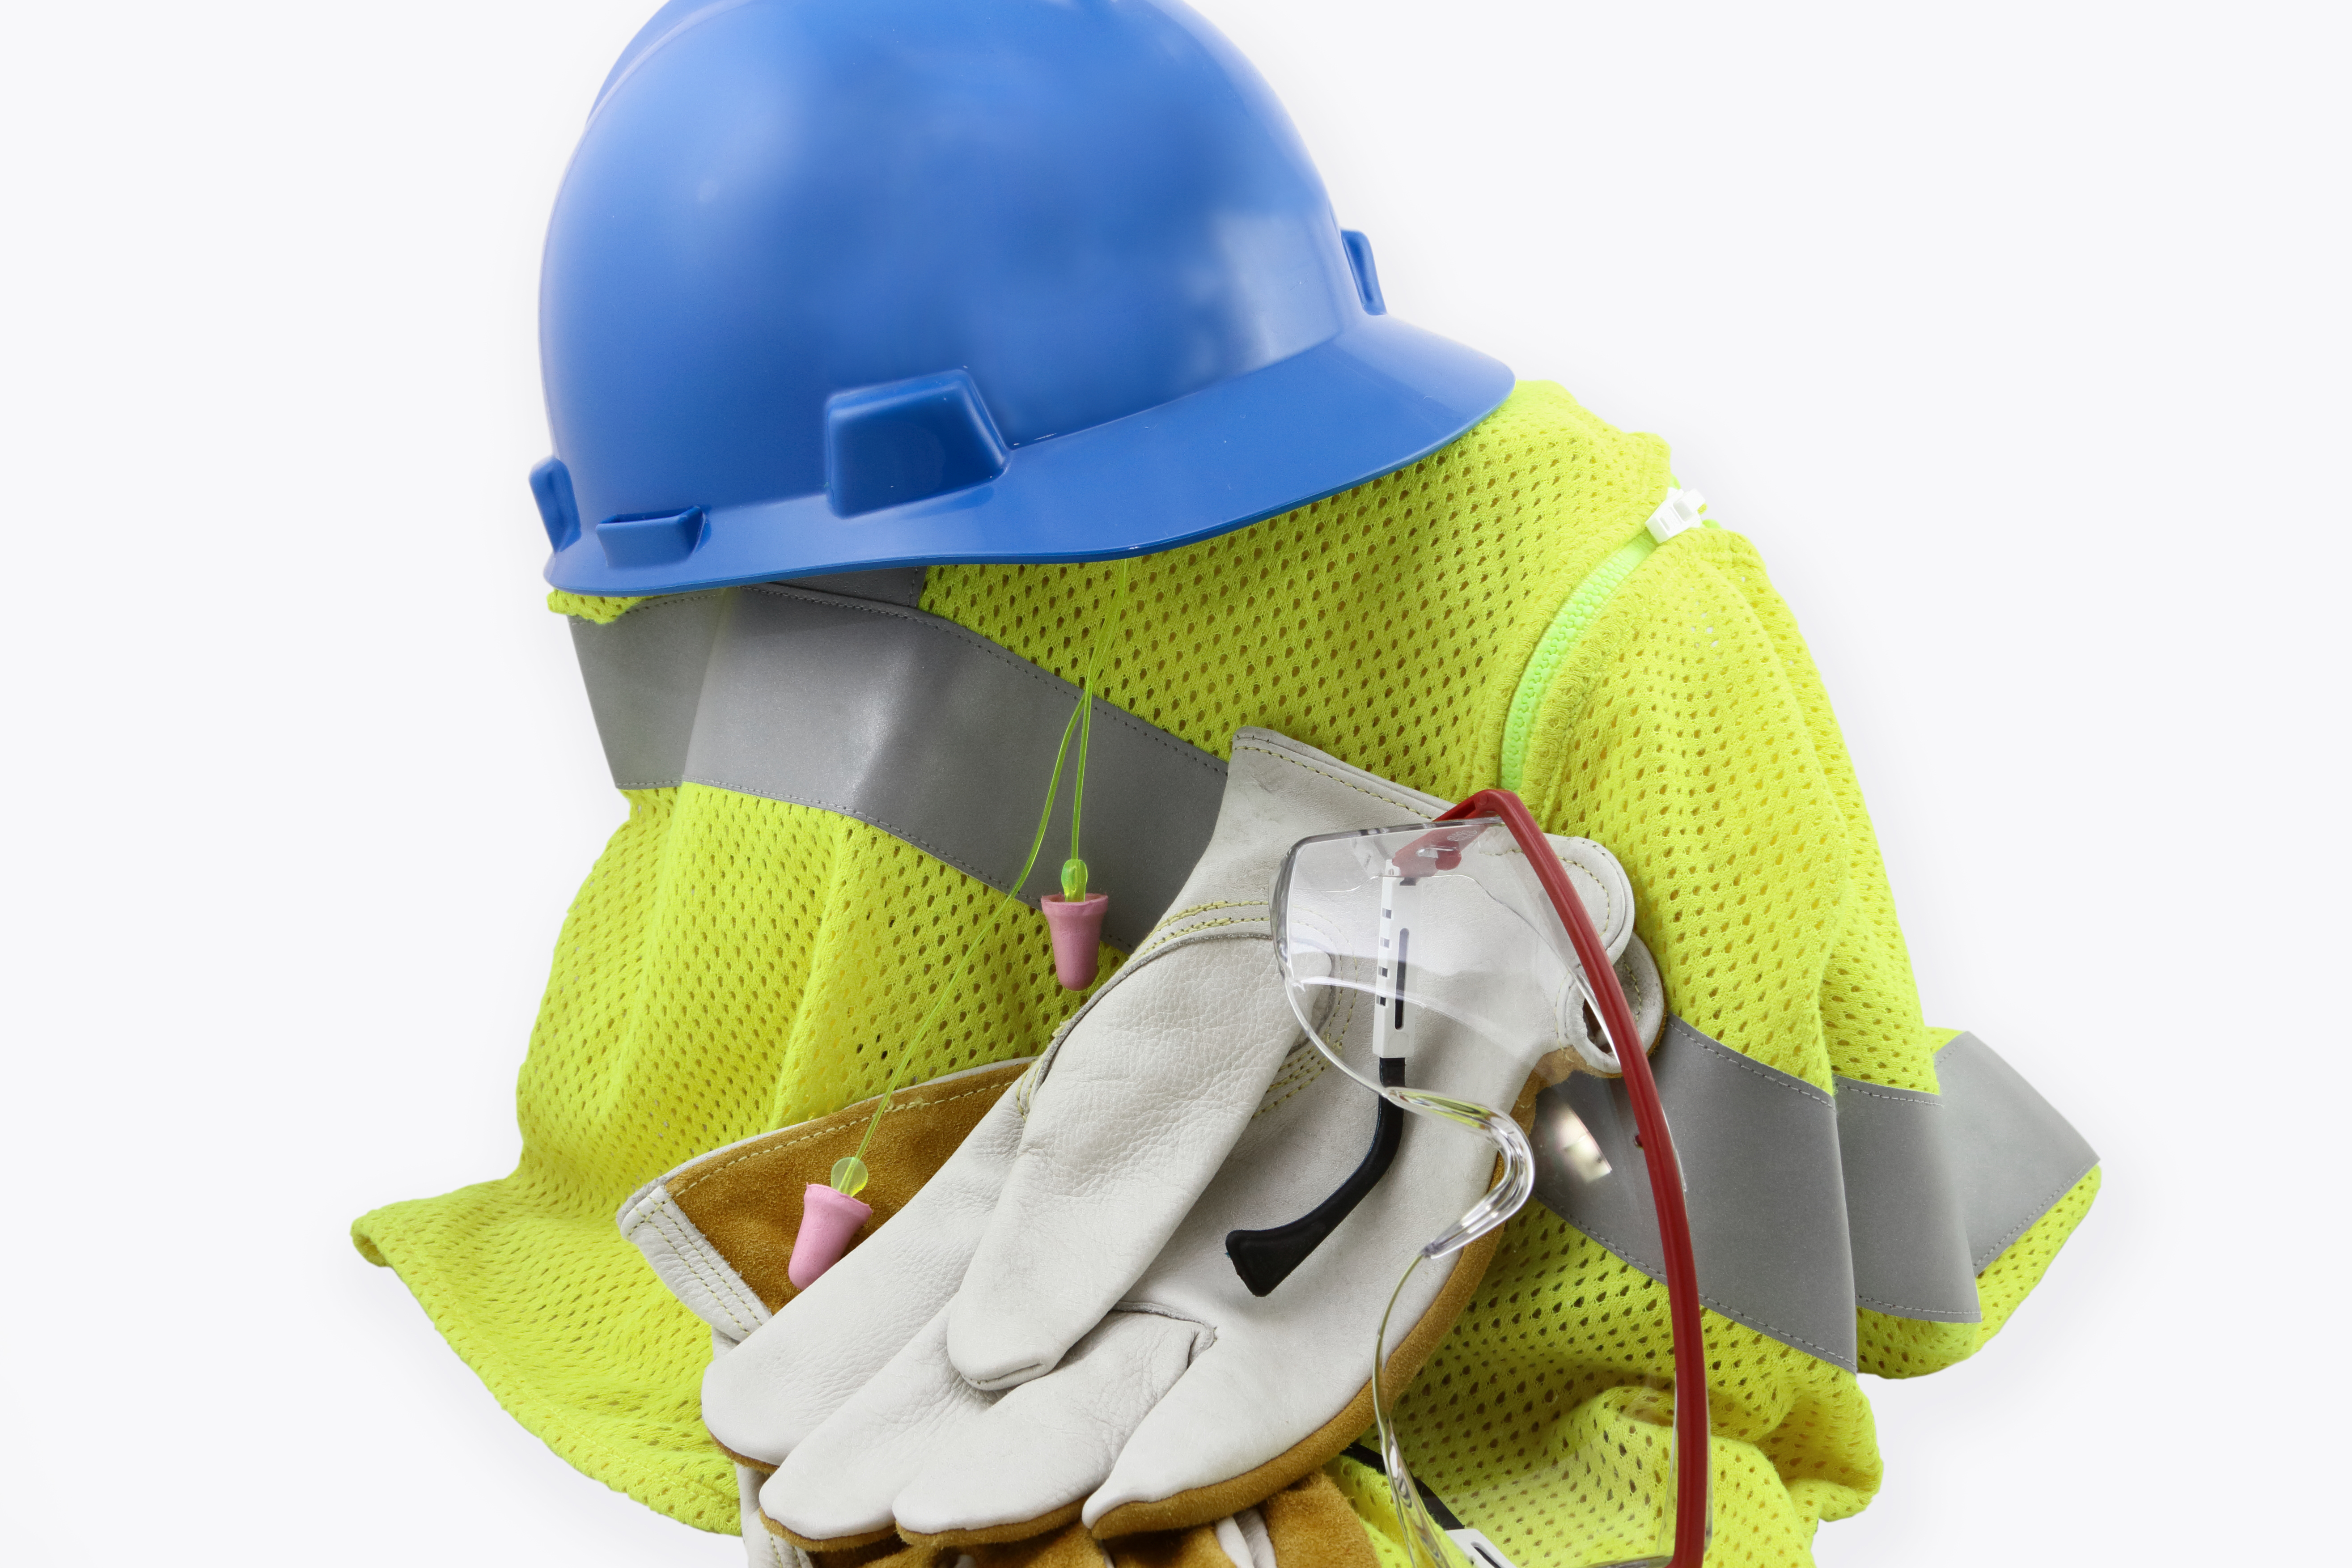 health and safety gear